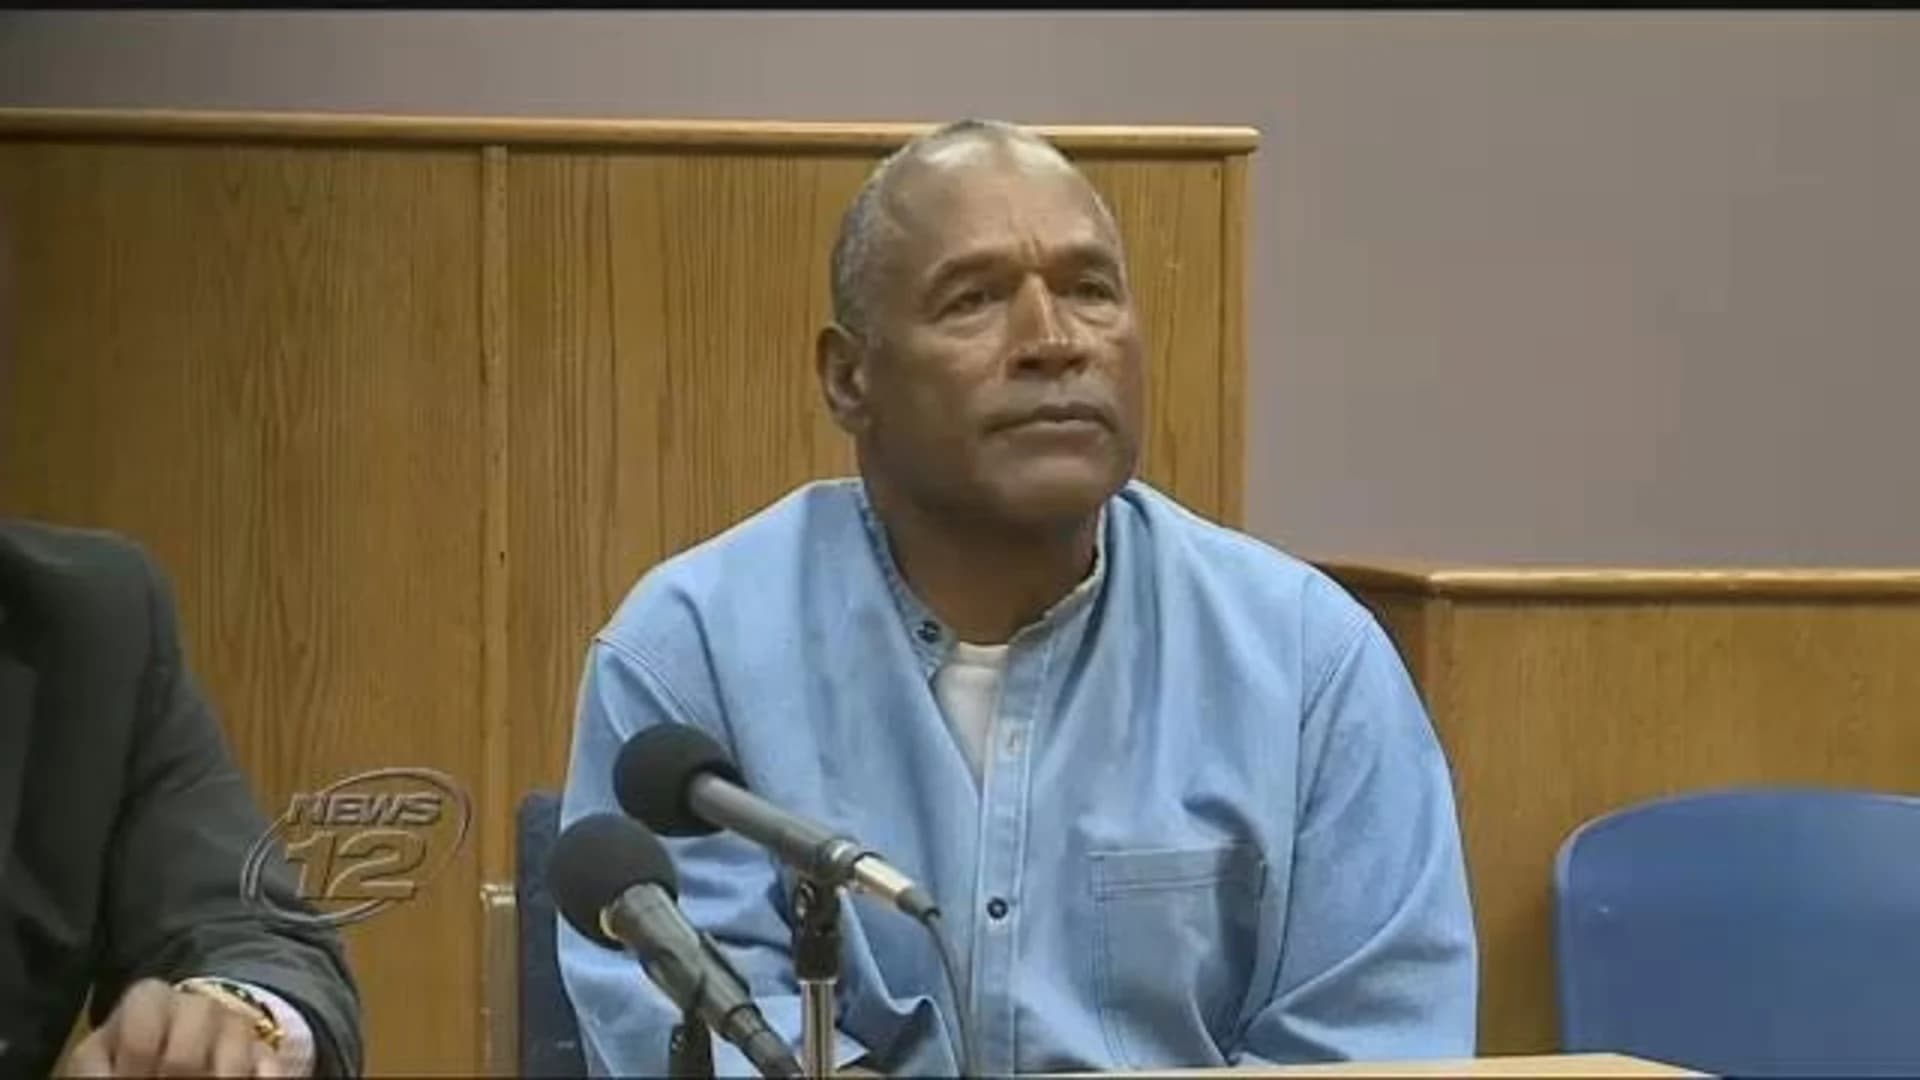 O.J. Simpson out of prison after 9 years for armed robbery